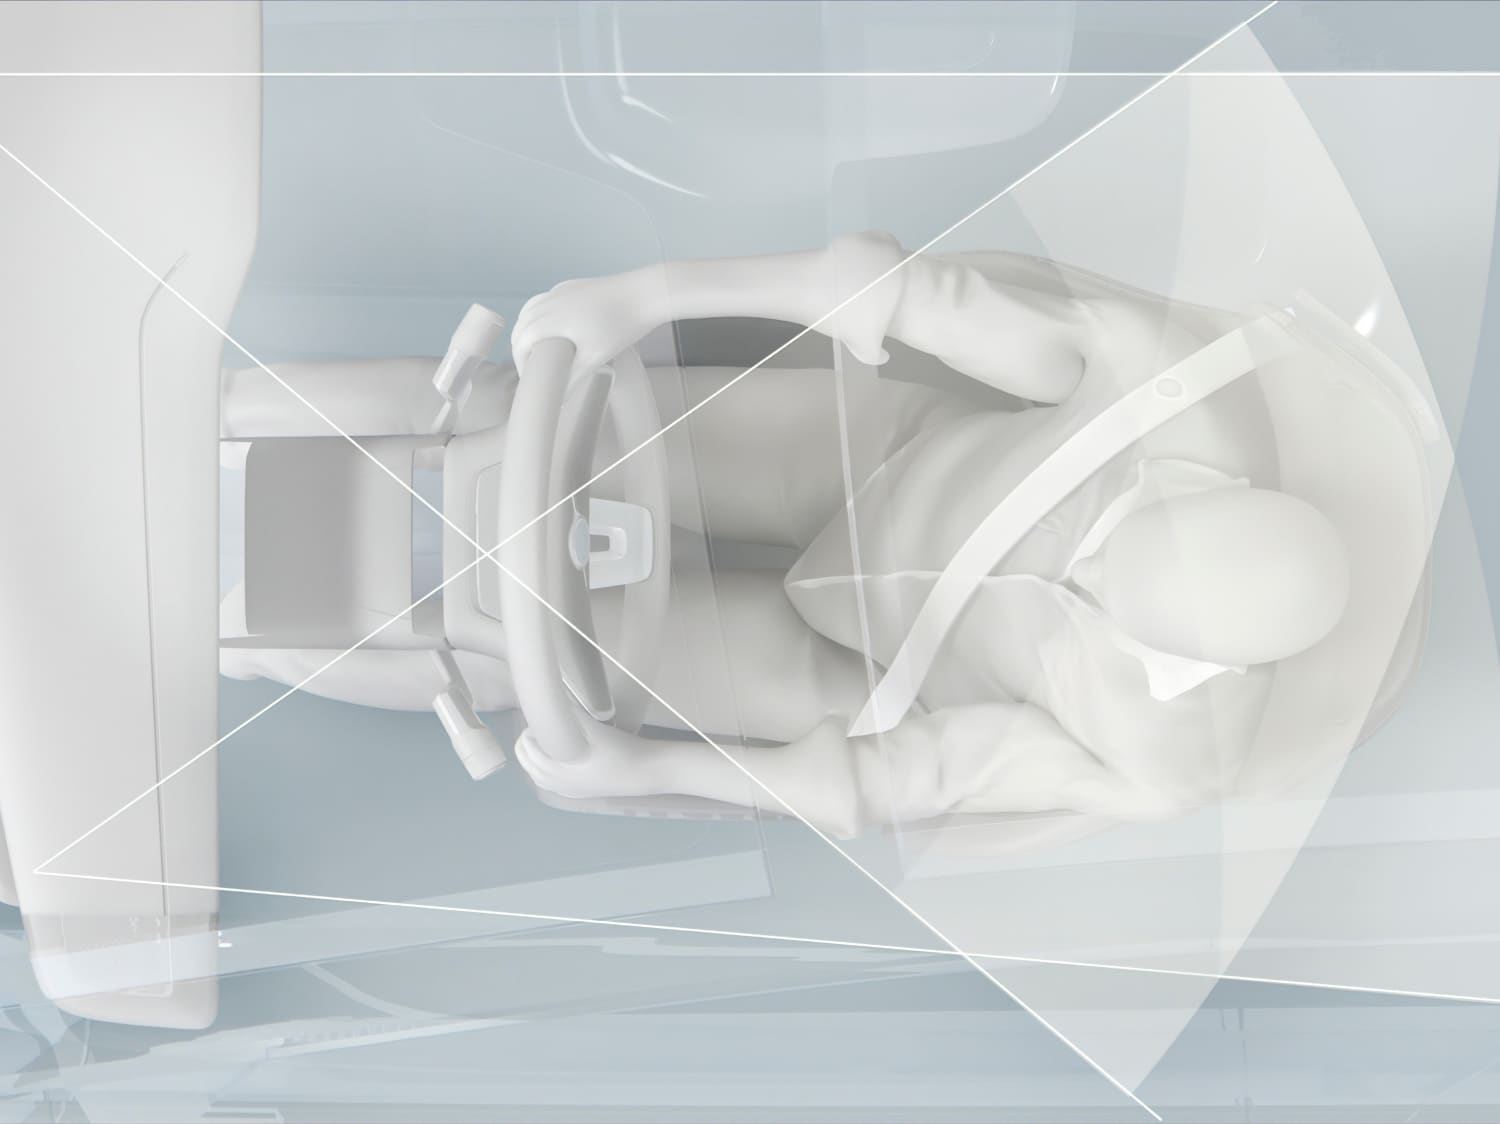 A digital rendering of a person in the driver’s seat of a car.